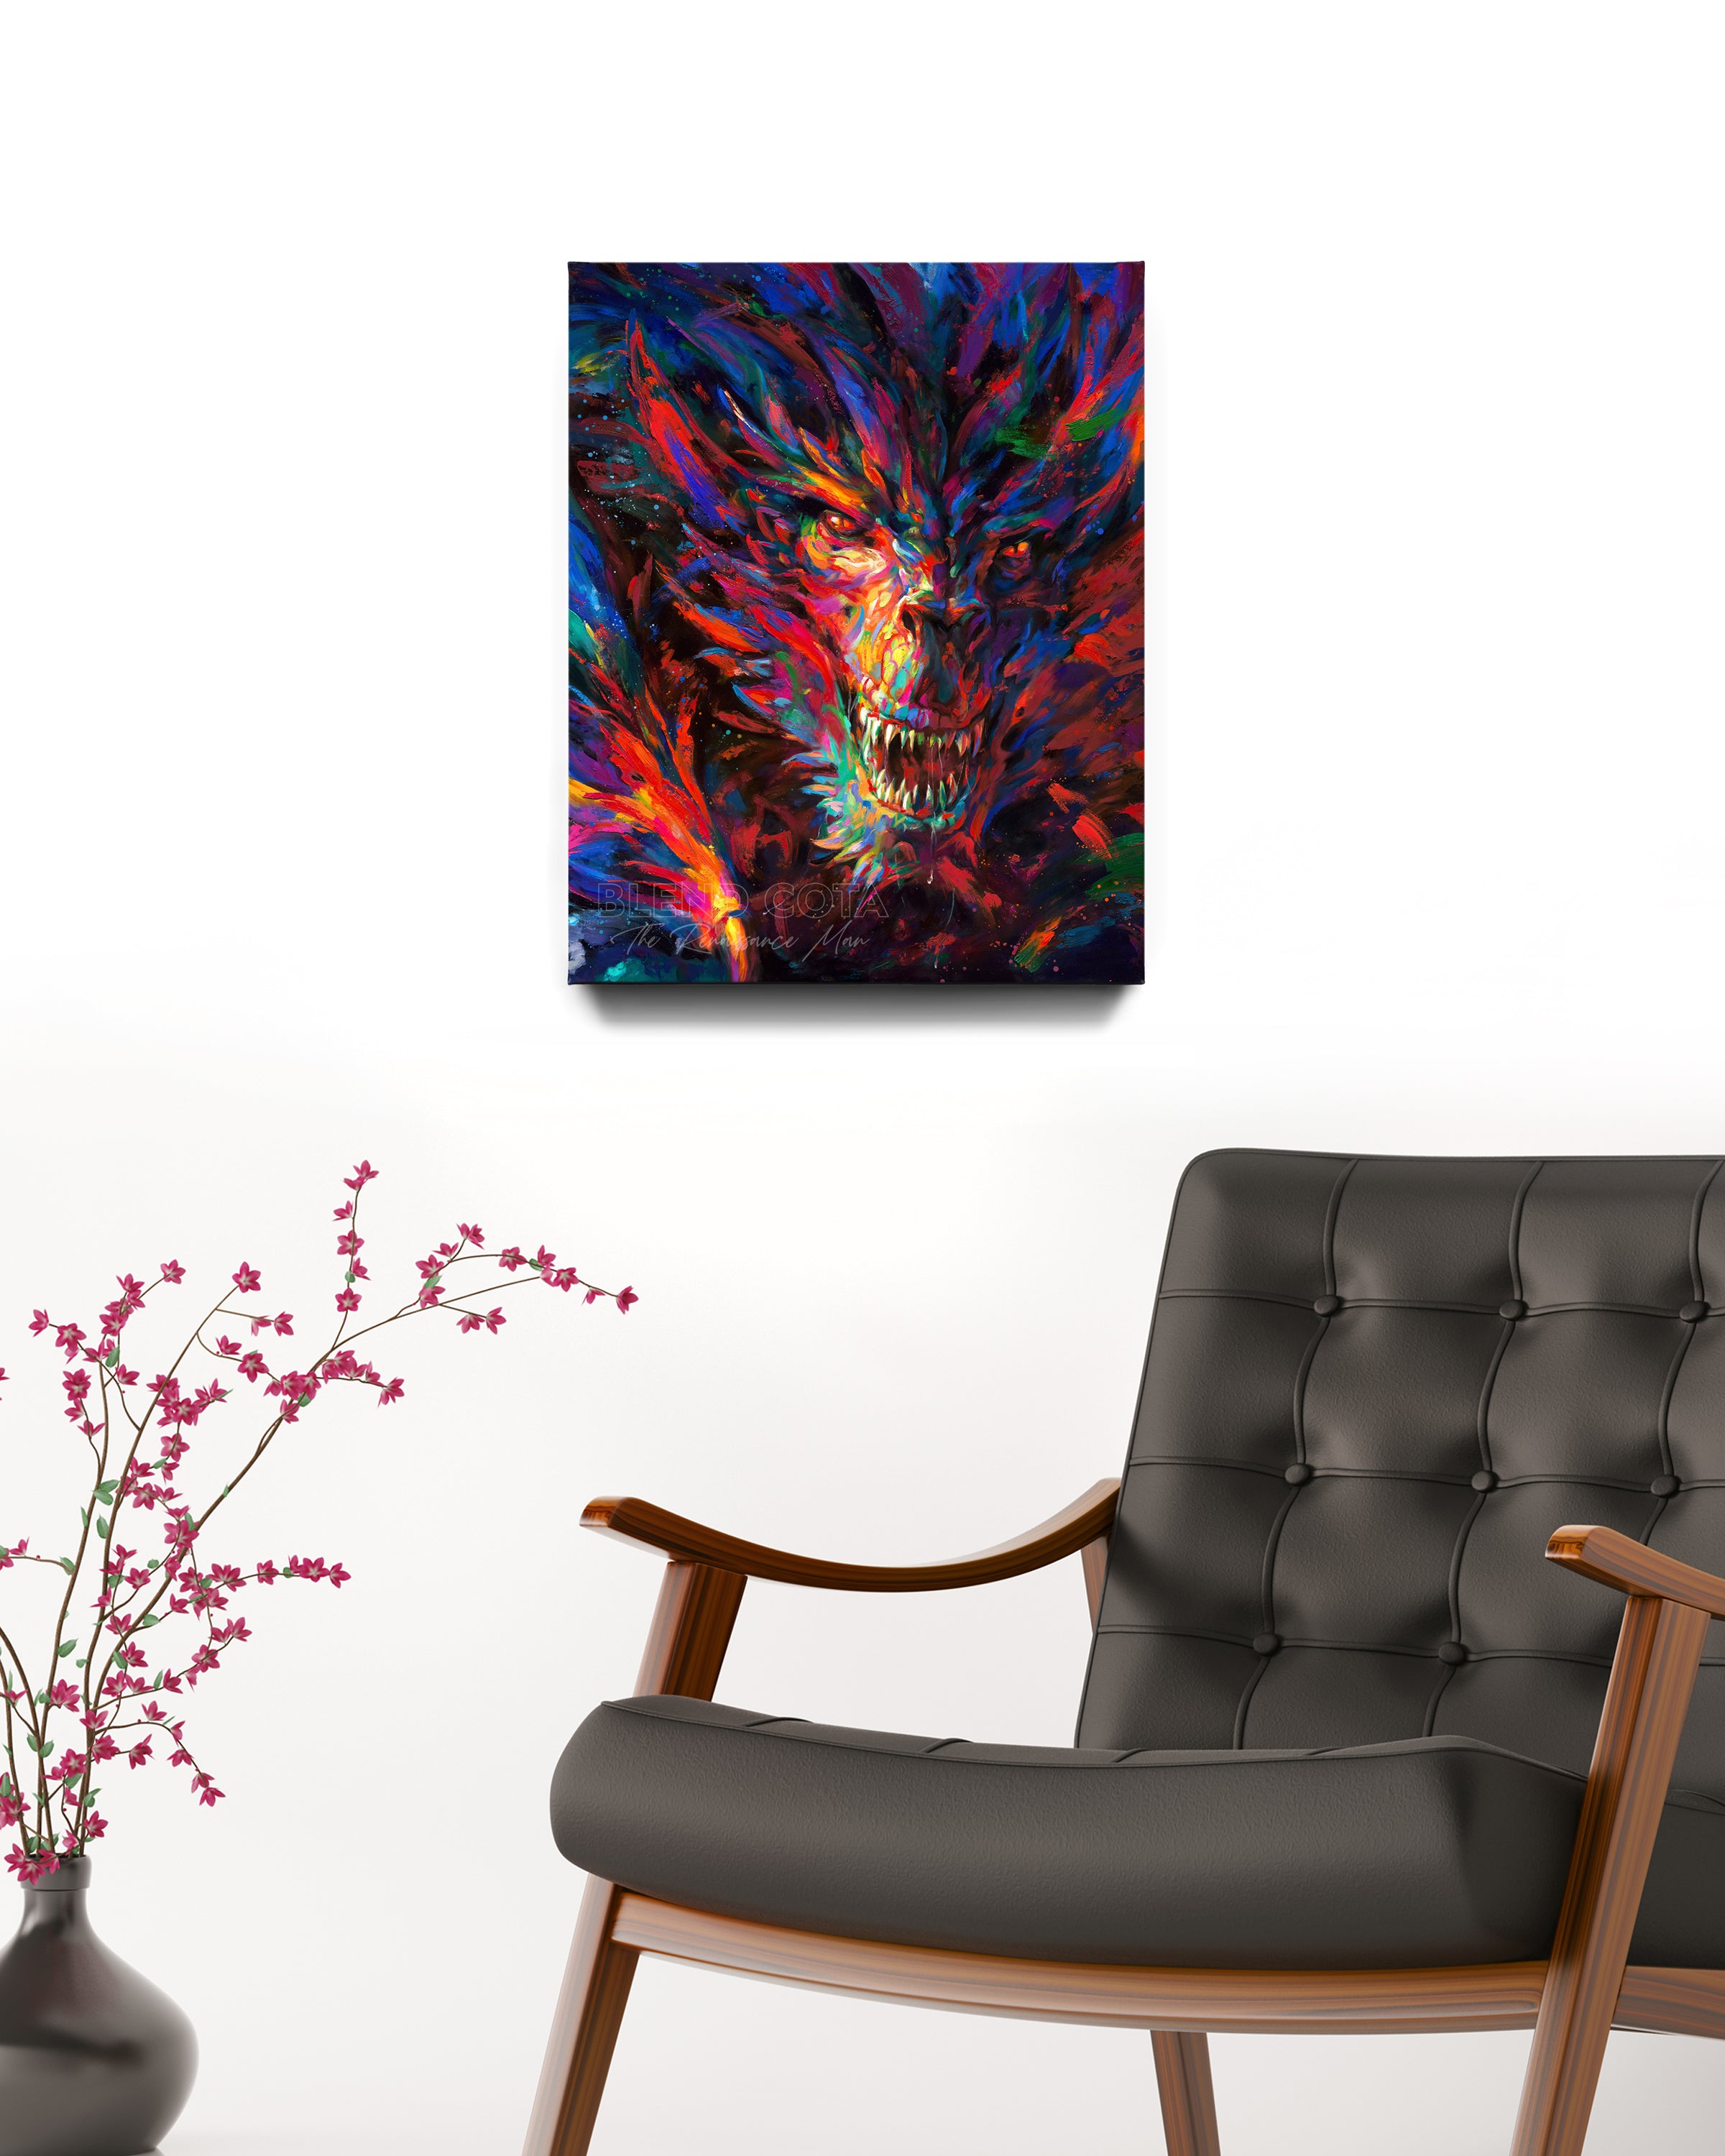 
                  
                    Framed art print on canvas of the dragon of war, legendary mythical being engulfed in red and blue flame, emerging from darkness with colorful brushstrokes in an expressionistic style in a room setting.
                  
                